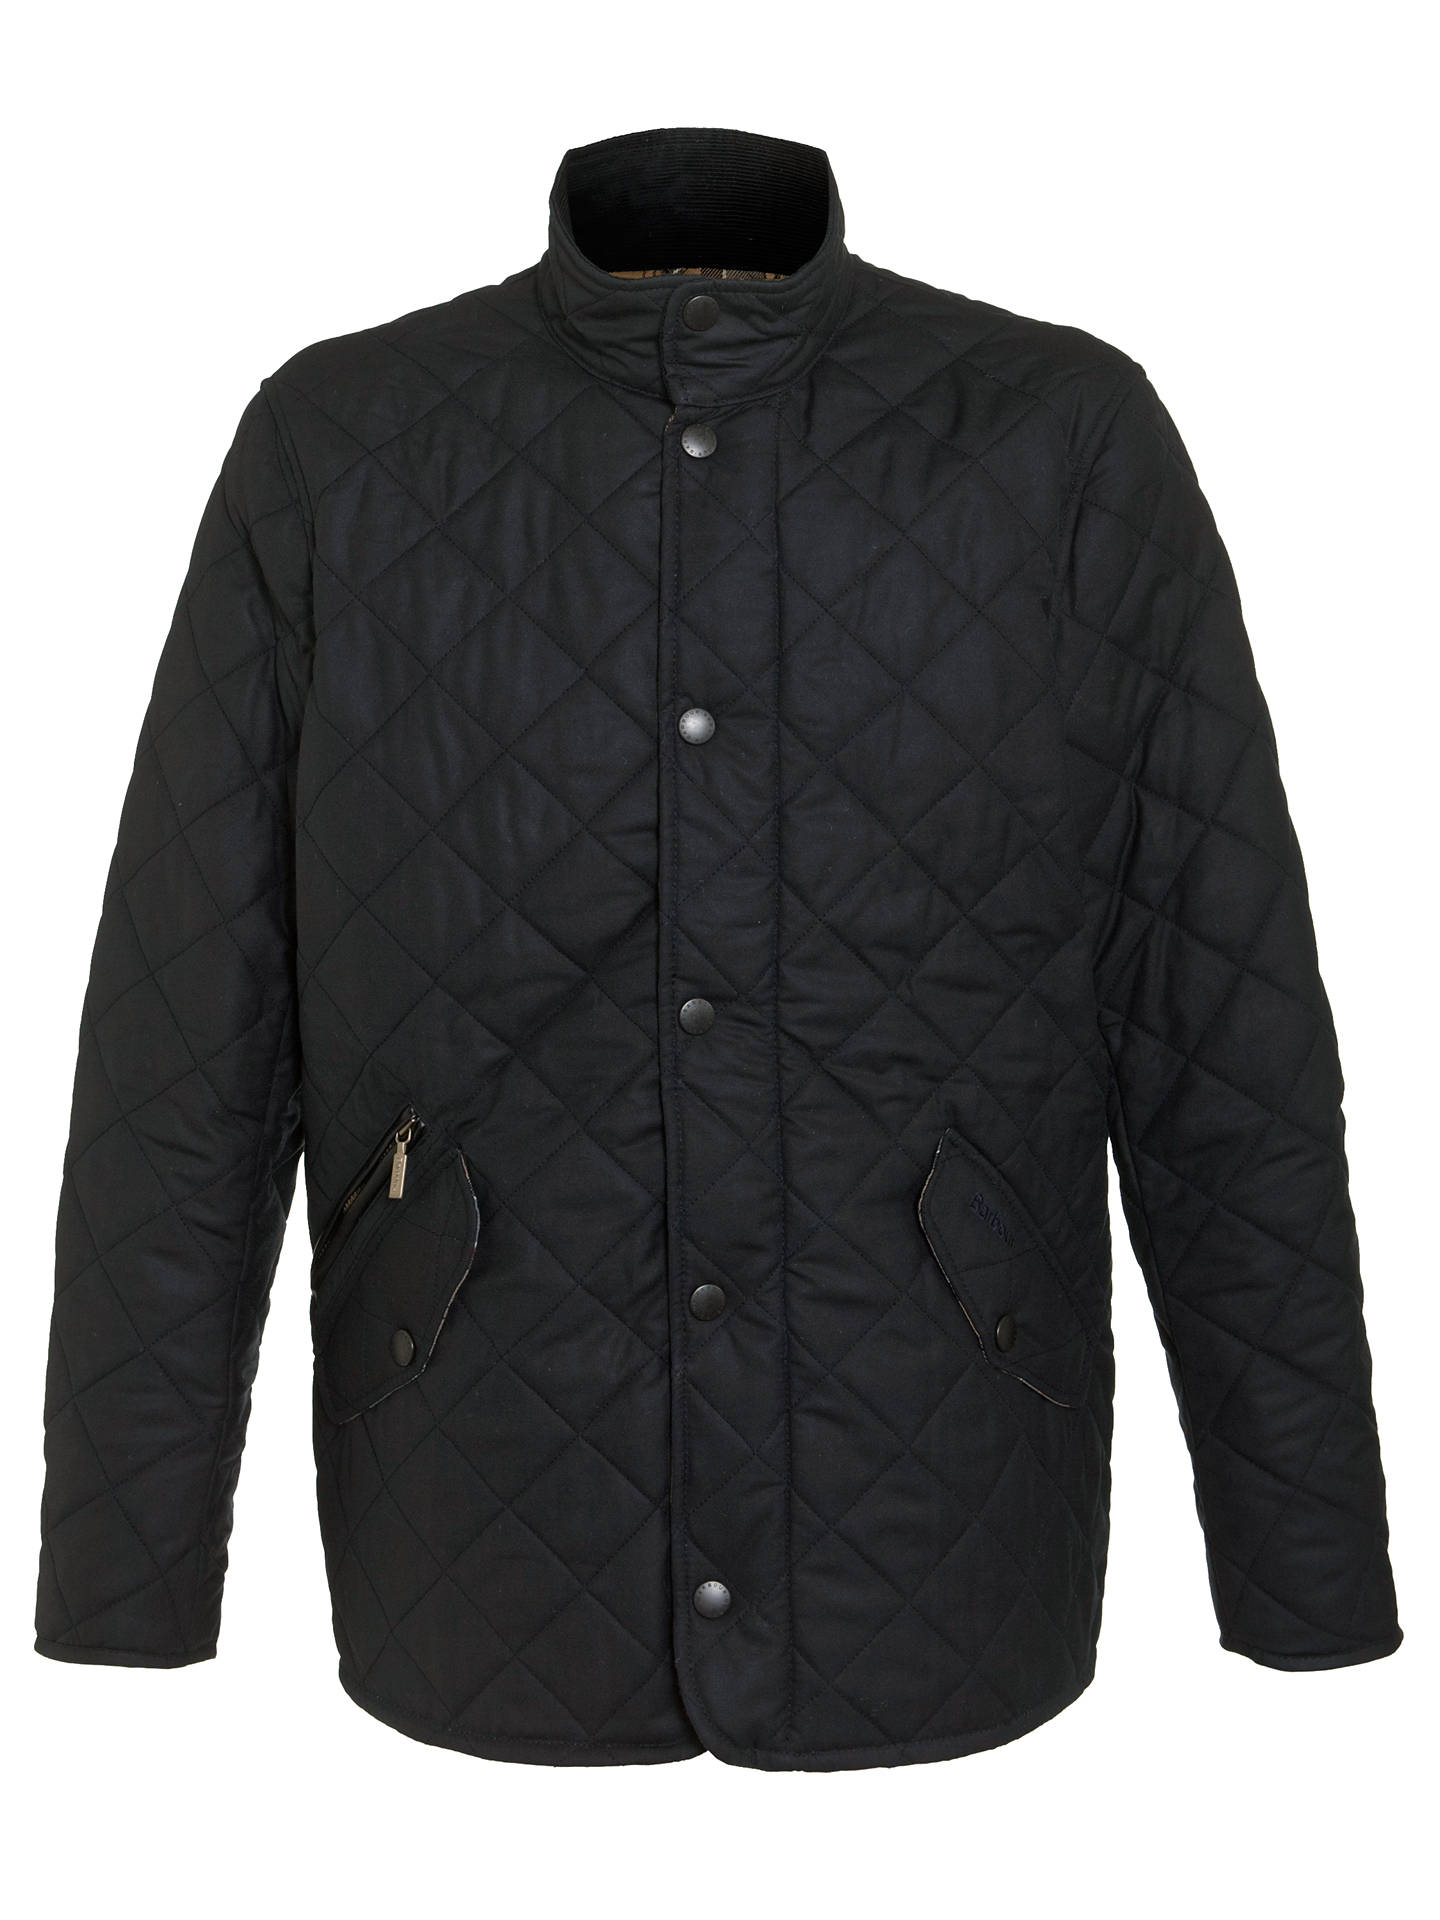 Barbour Waxed Quilted Funnel Neck Jacket, Black at John Lewis & Partners